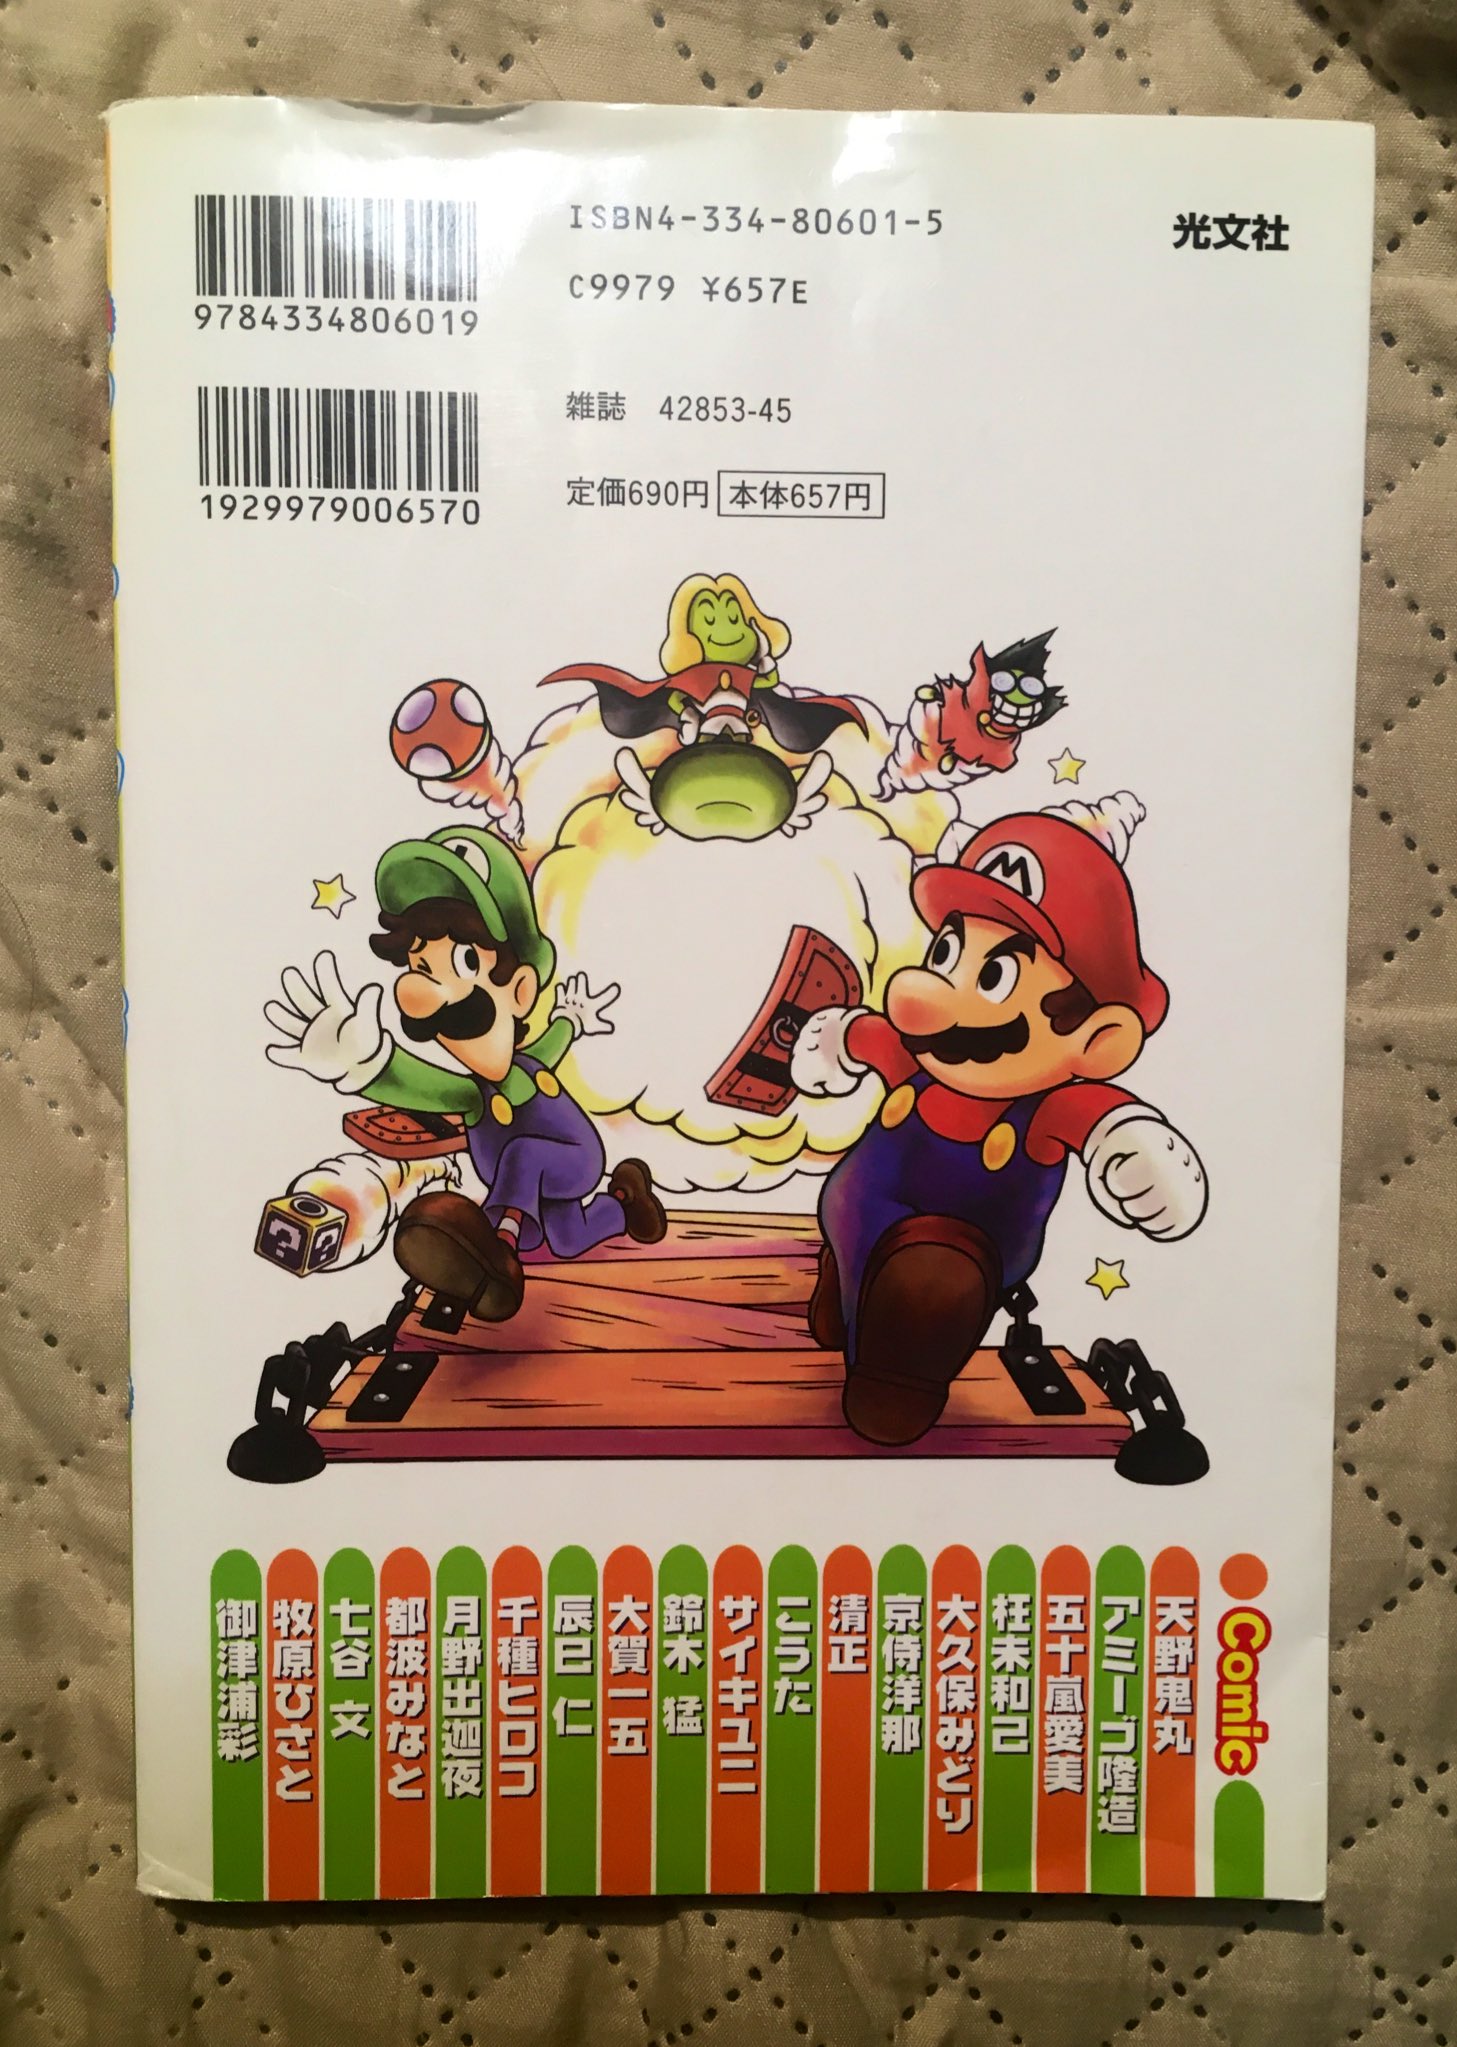 Kairy Draws I Forgot To Say Where This Is From It S From The 03 Mario Luigi Rpg Superstar Saga 4koma Manga This Was An Extremely Lucky But Also Hard Find